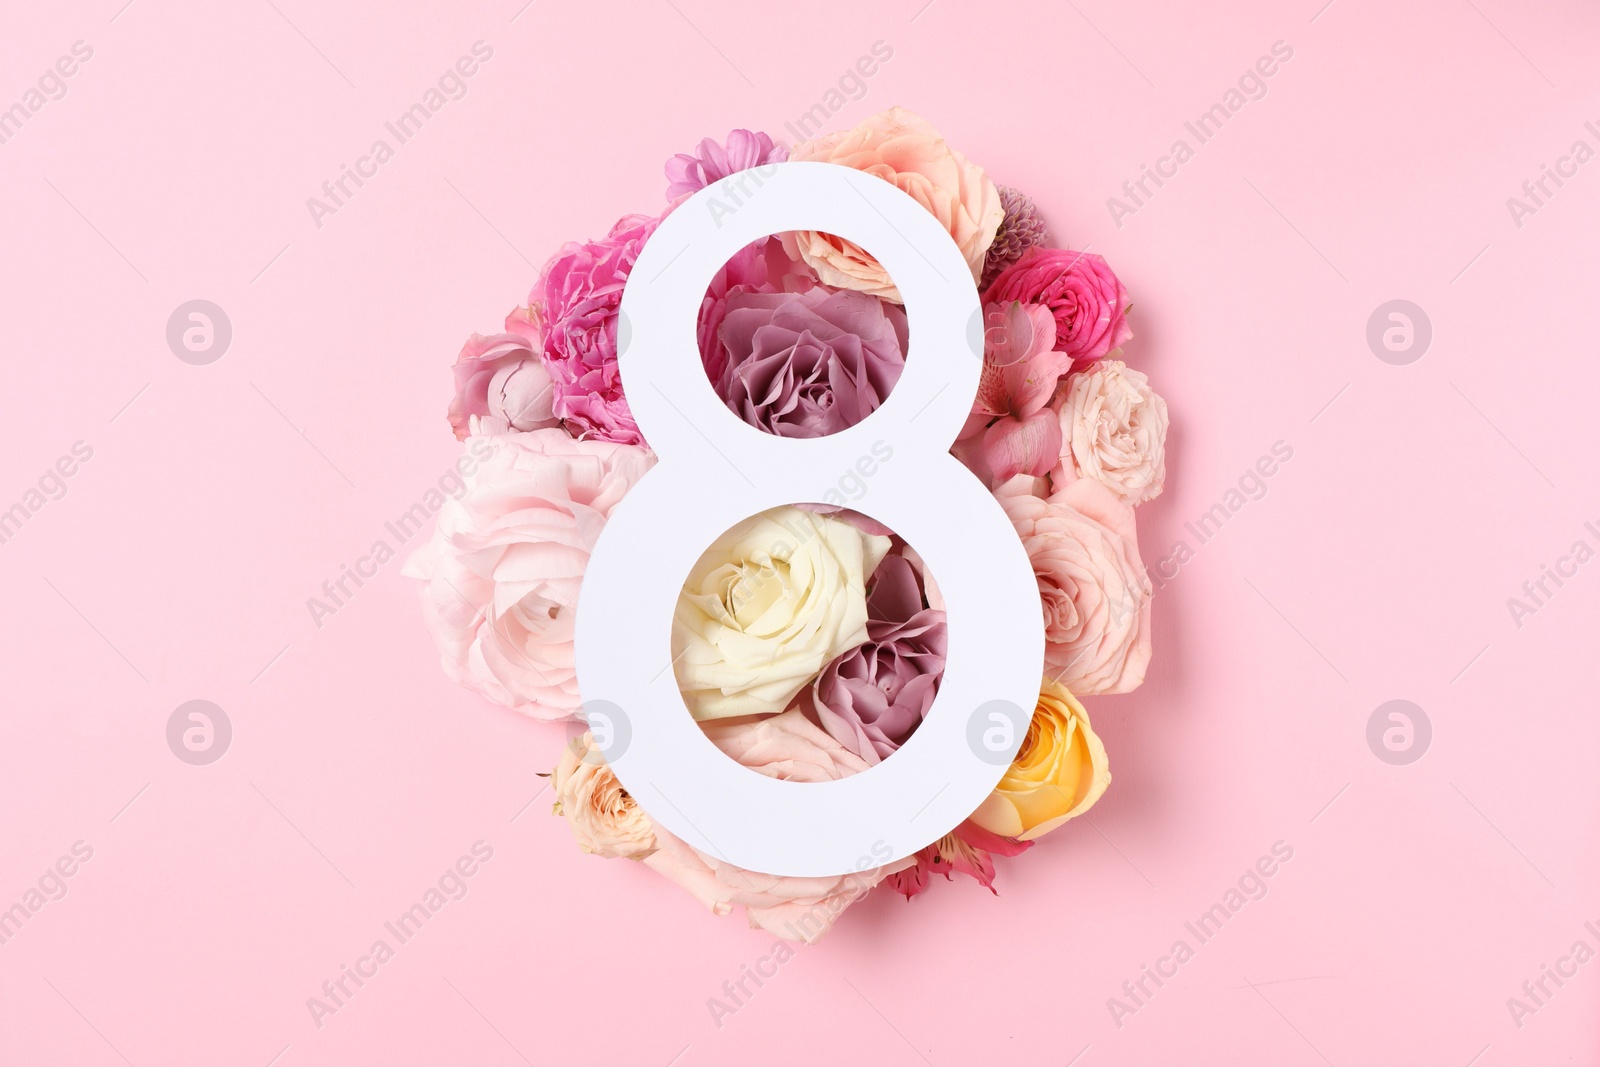 Photo of 8 March greeting card design with beautiful roses on light pink background, top view